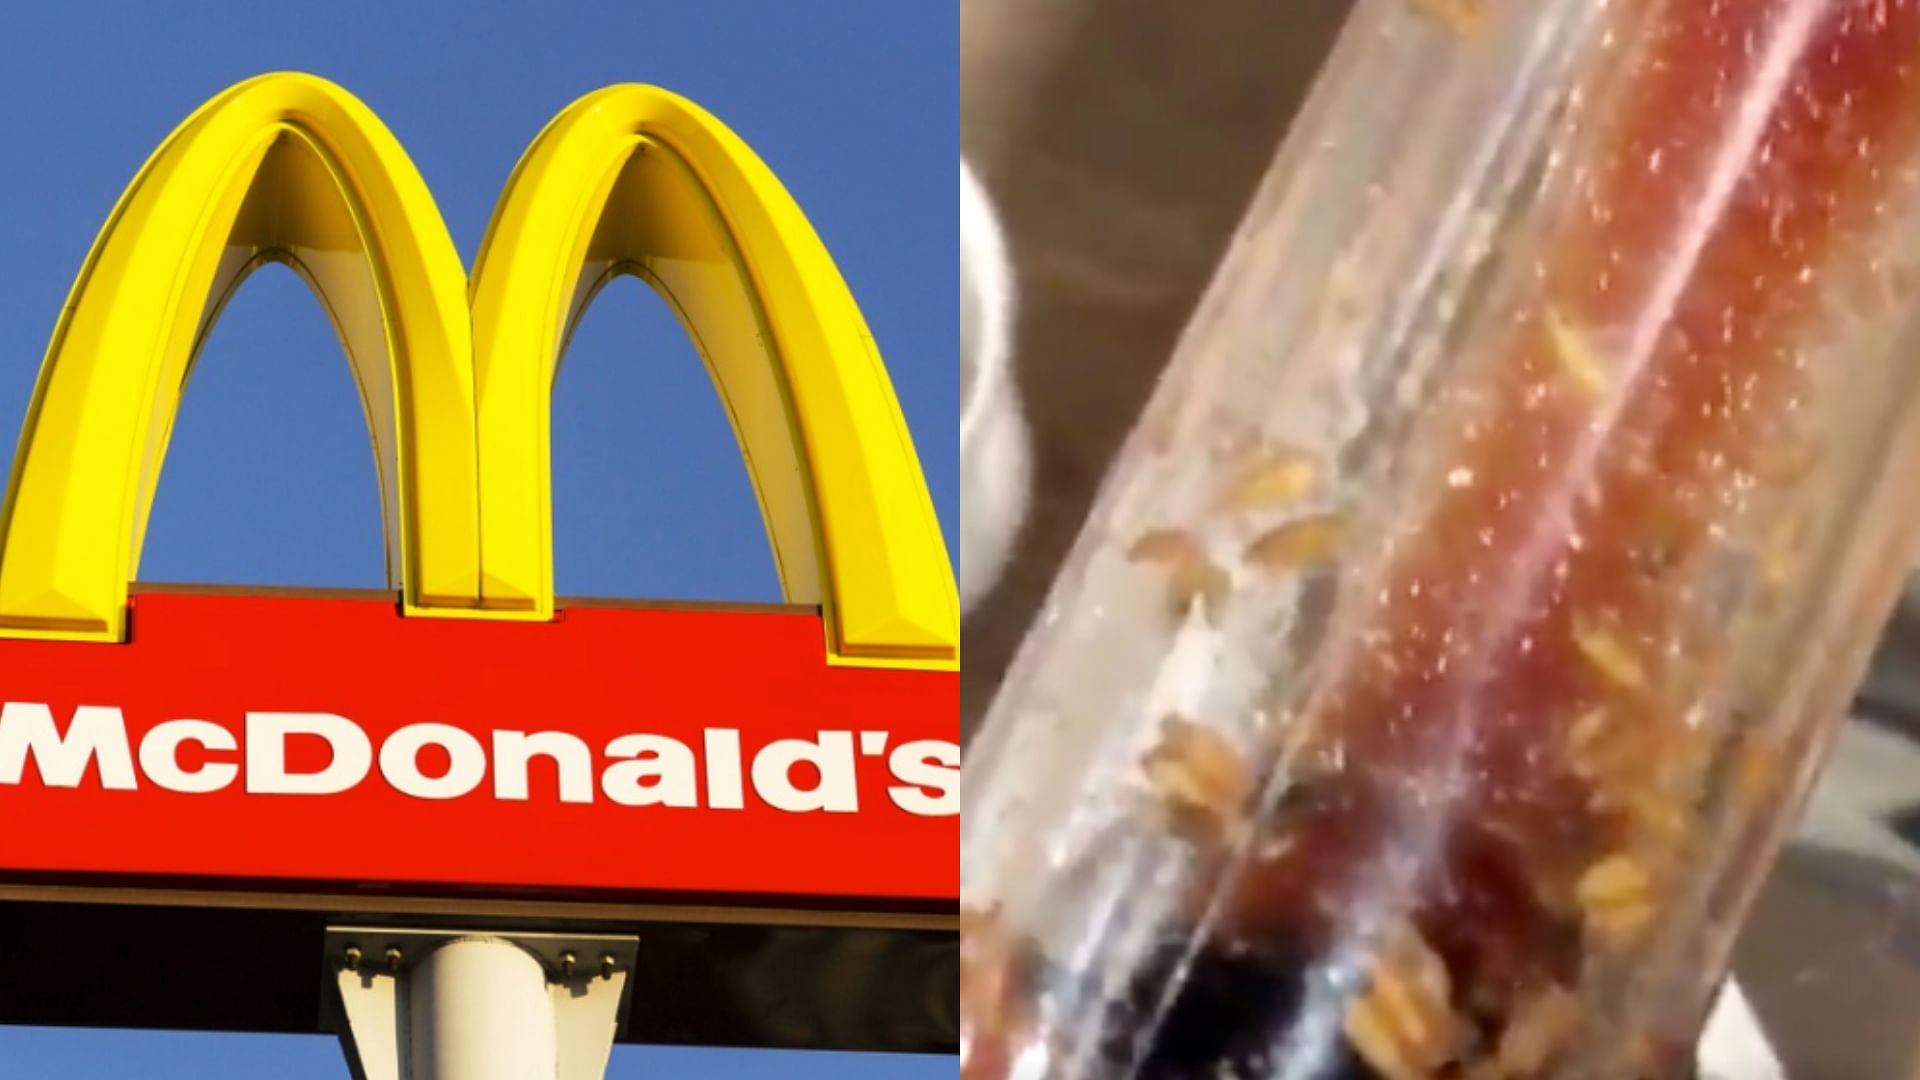 A Twitter user posted a video showing a ketchup dispenser in one of the McDonald’s outlets in the UK.